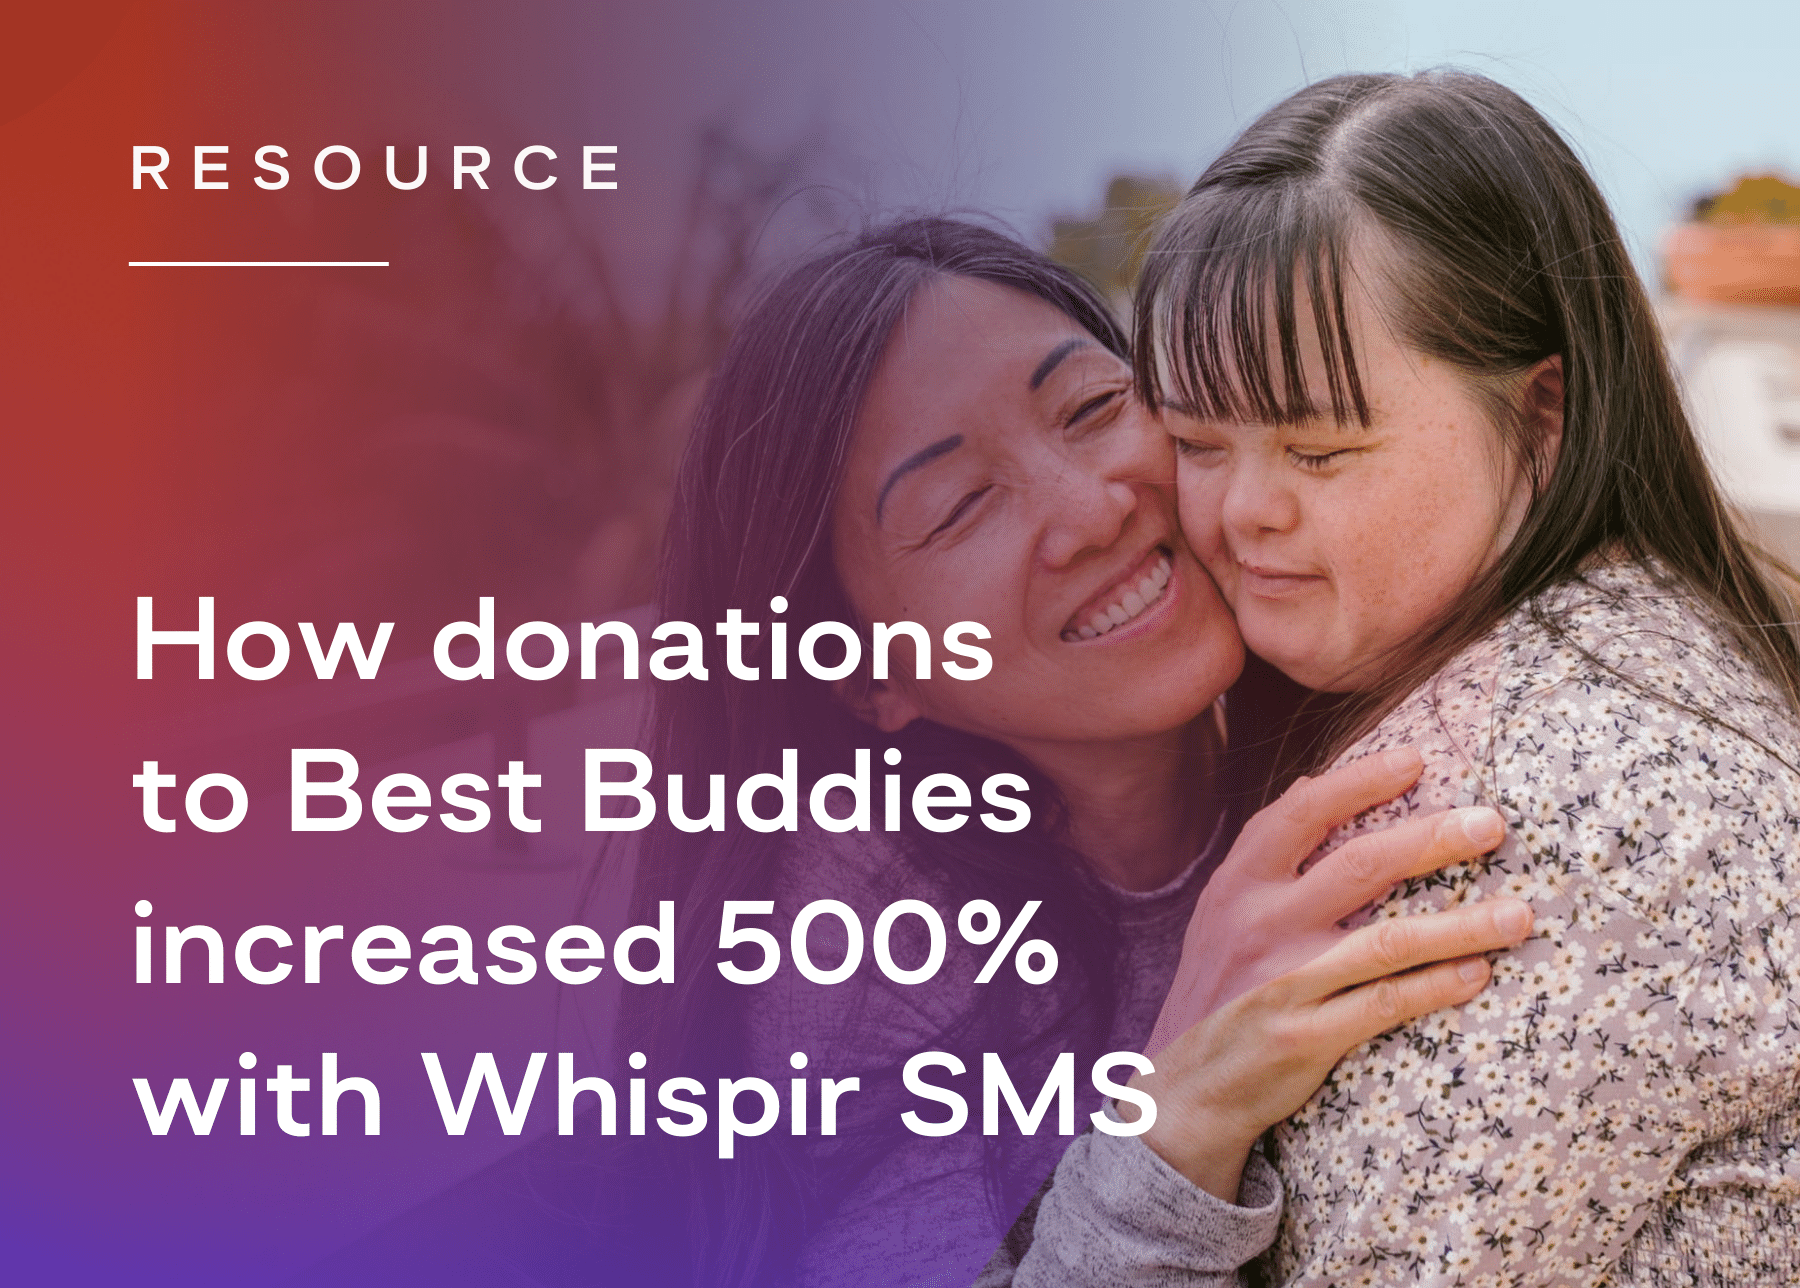 Two people embrace with the caption "How donations to Best Buddies increased 500% with Whispir SMS"